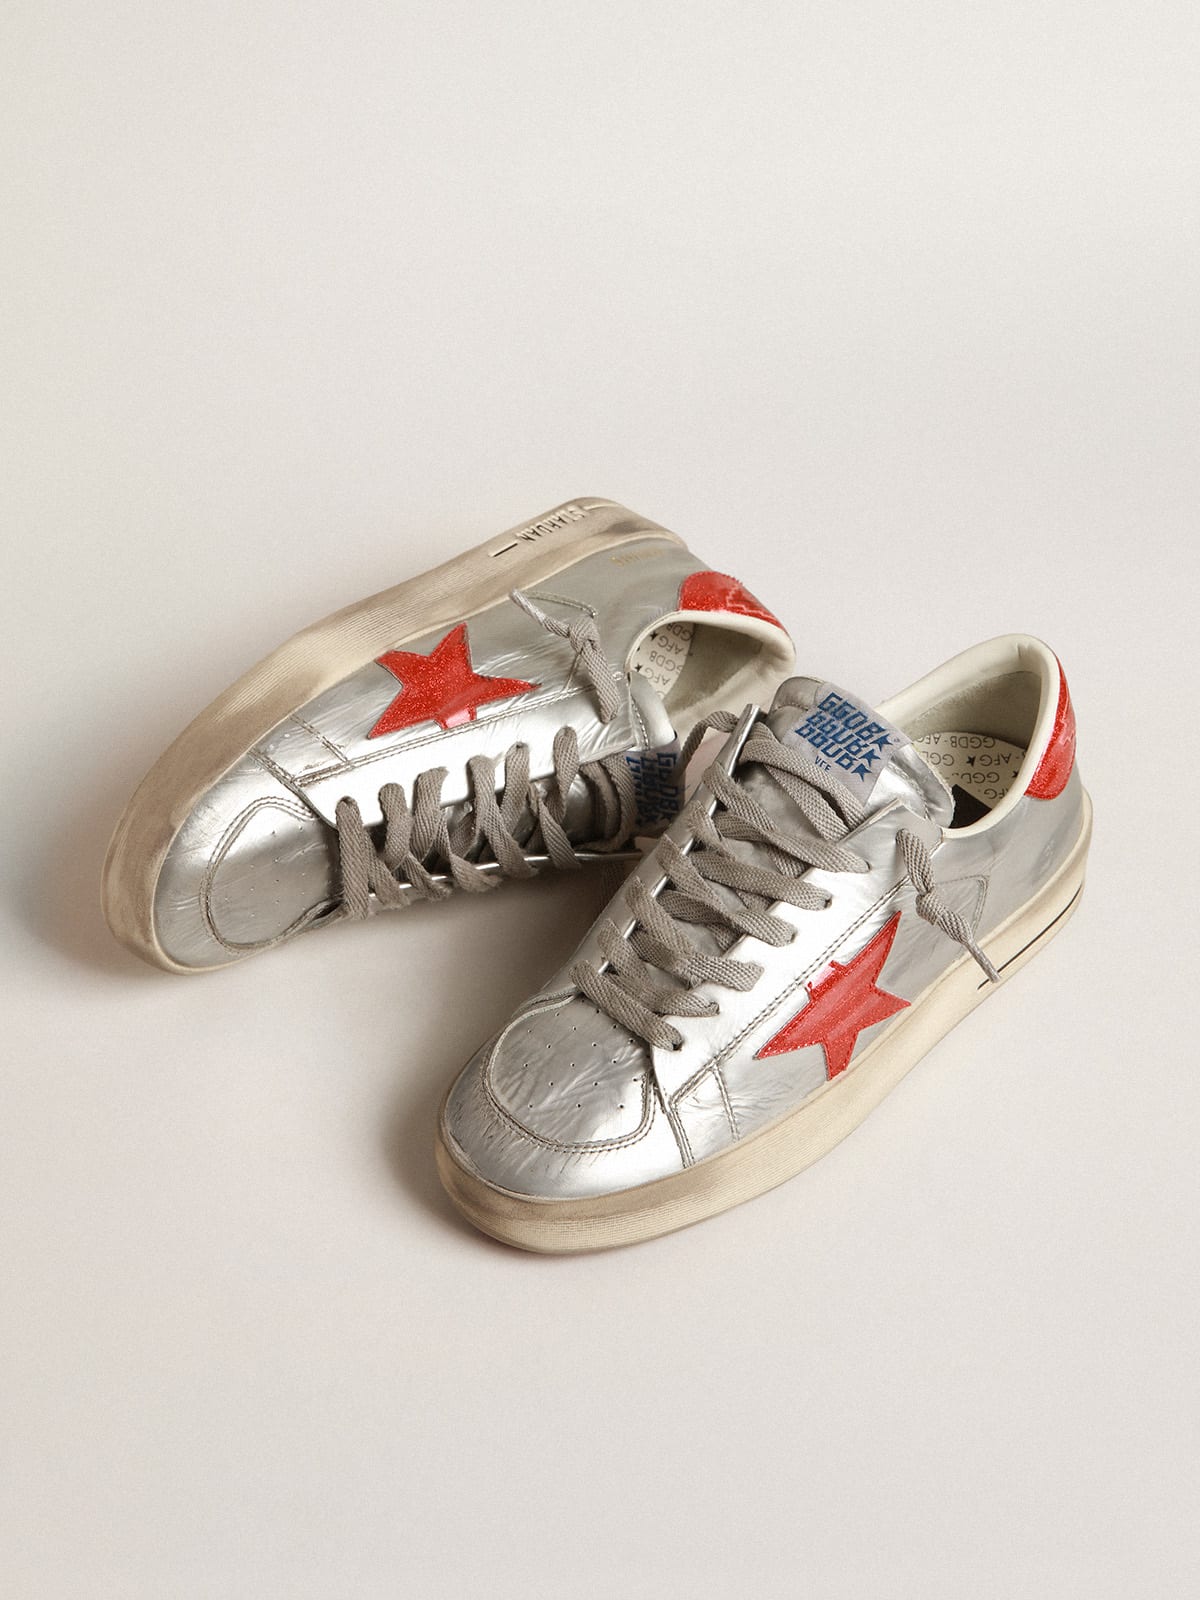 Golden Goose - Women's Stardan in laminated leather with red glitter inserts in 